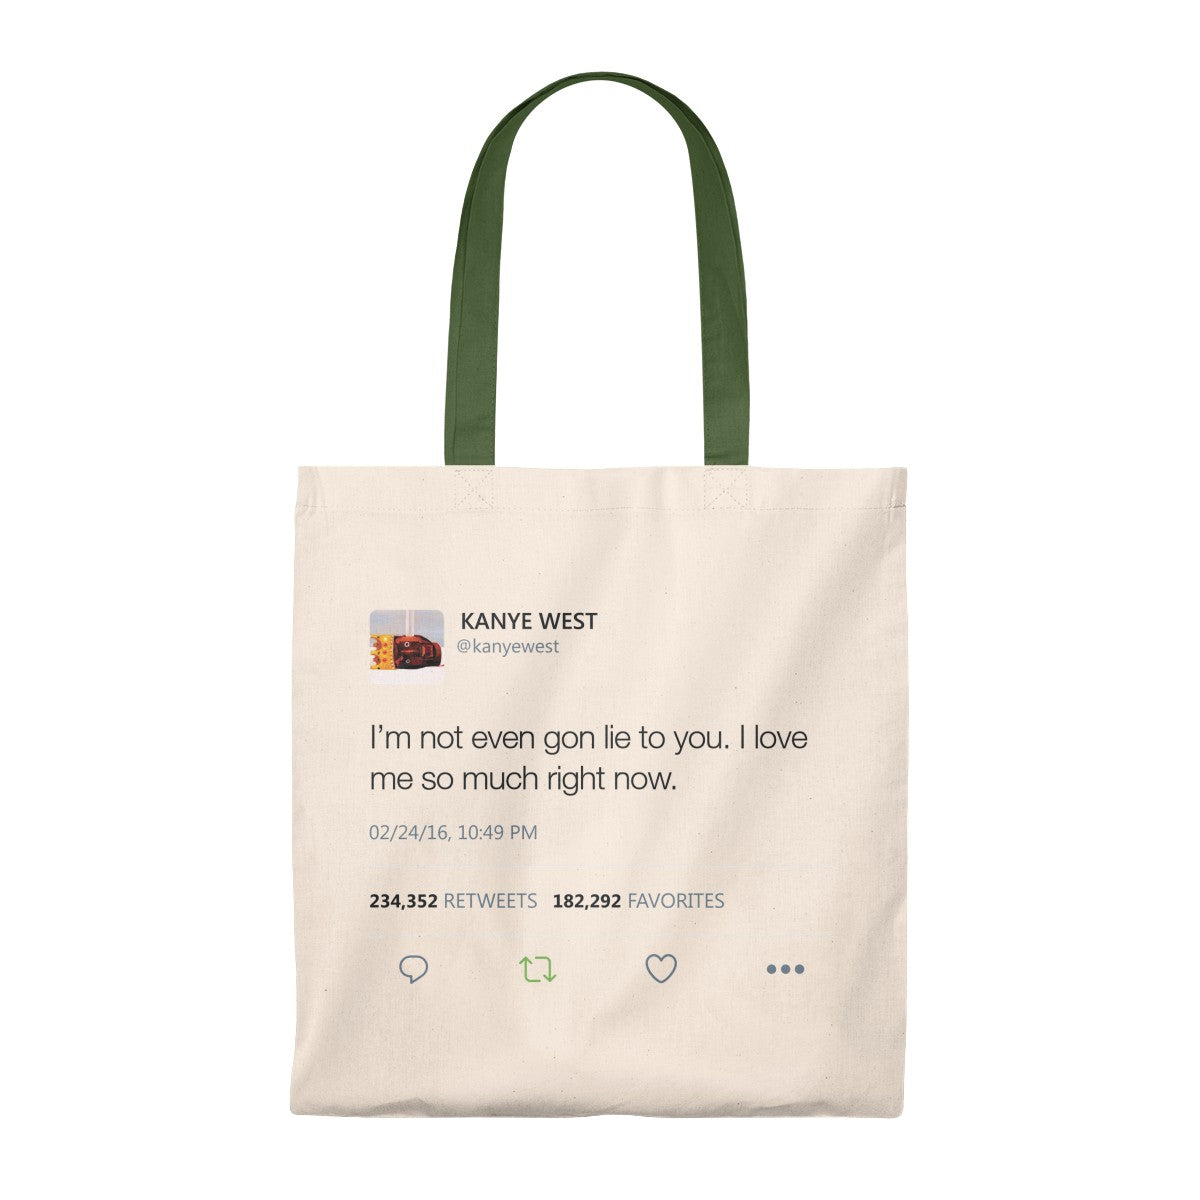 I Love Me So Much Right Now Kanye West Tweet Tote Bag-Natural/Hunter-Archethype